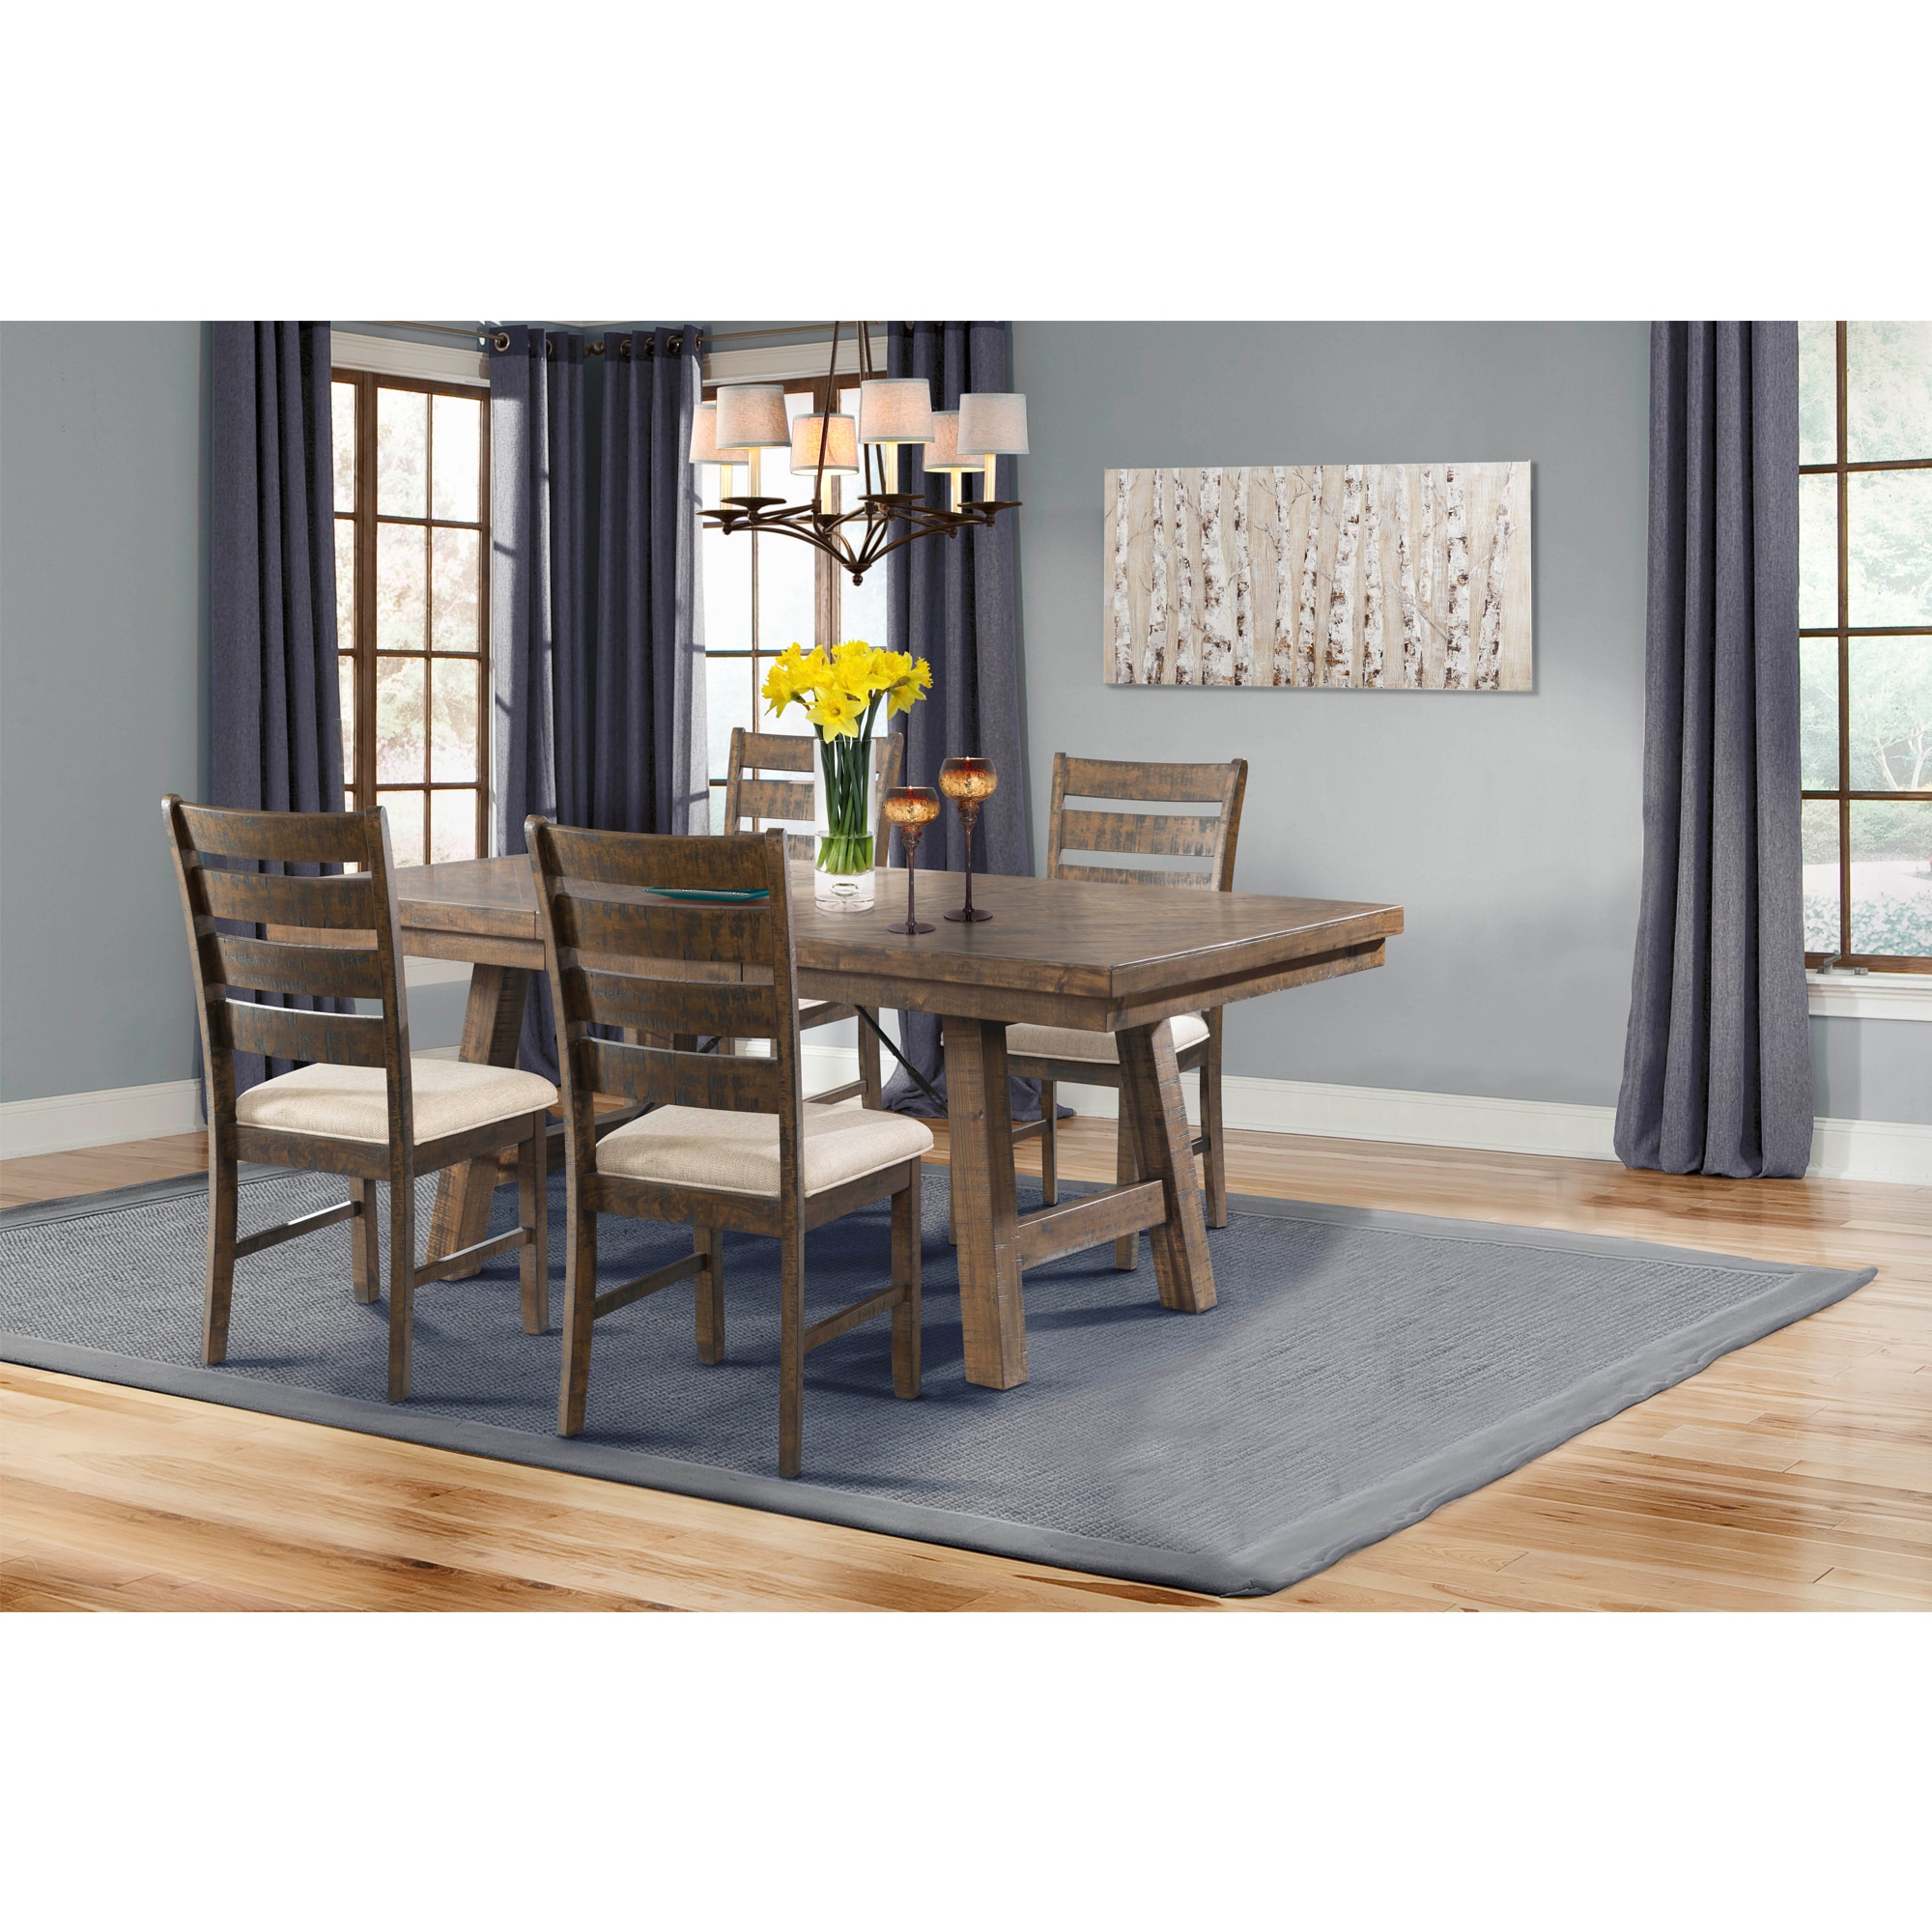 Dex Smokey Walnut with Cream Upholstery Rustic Dining Room Set with Rectangular Table (Seats 4) in Brown | - Picket House Furnishings DJX1505PC